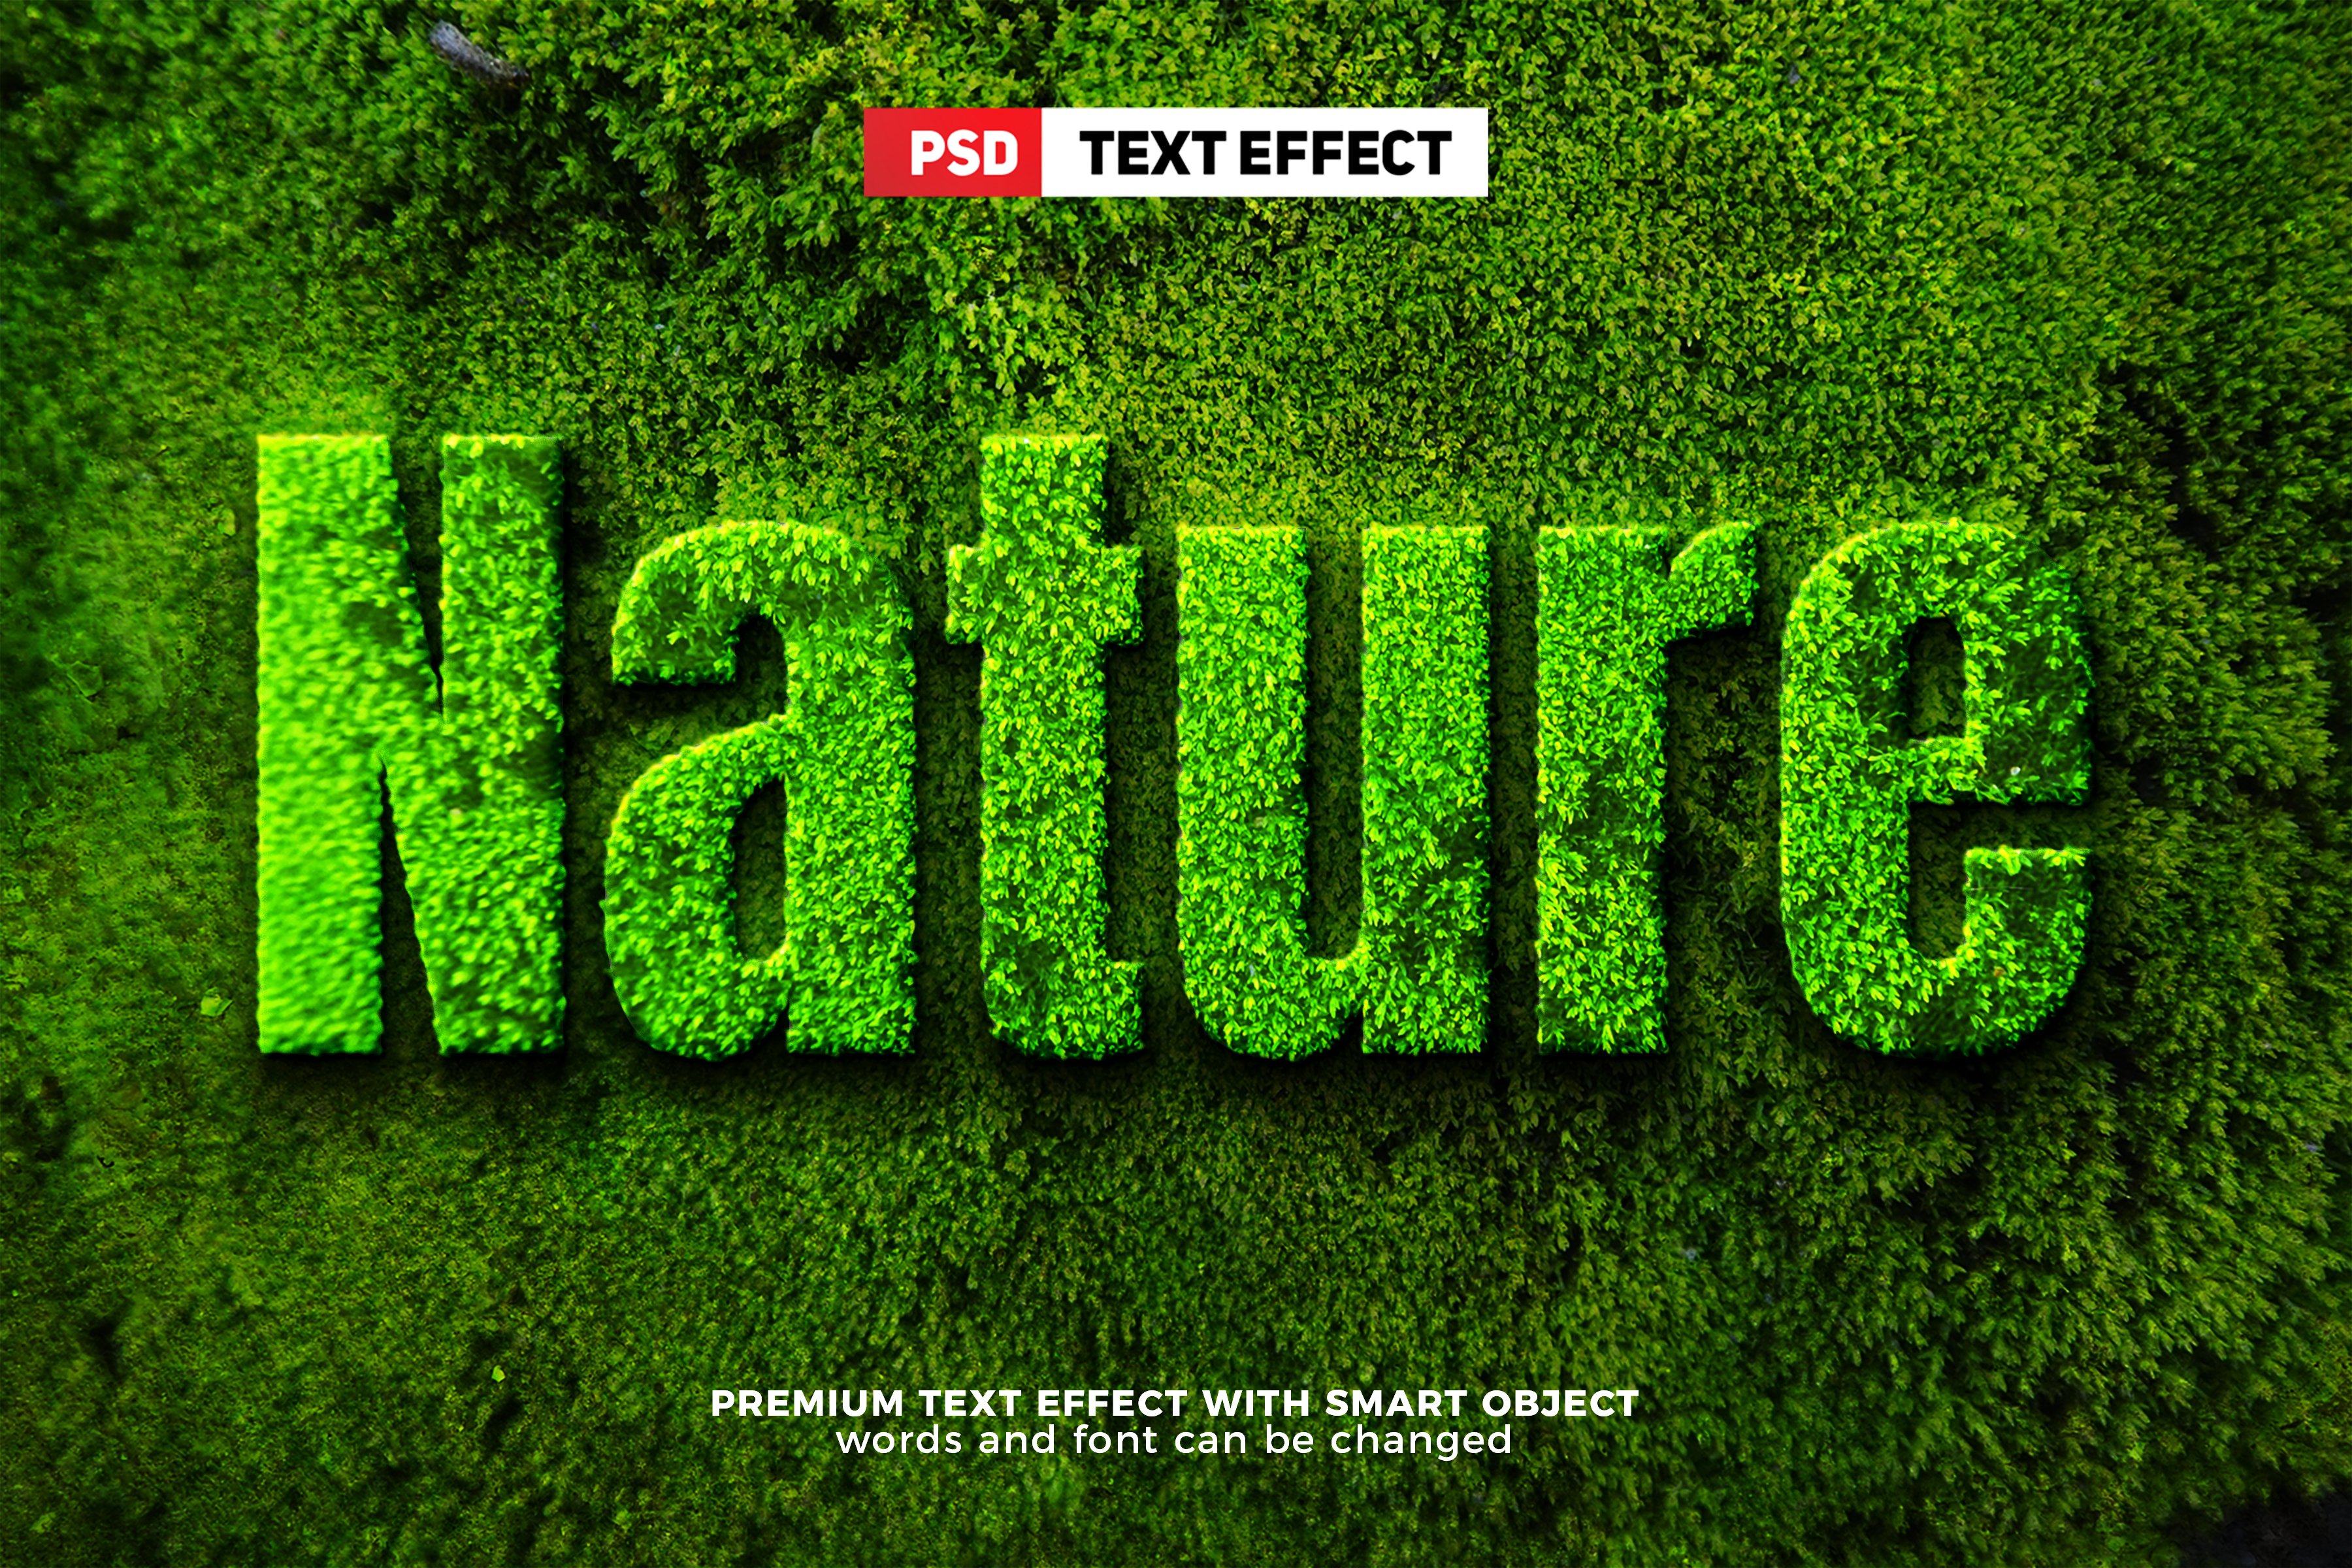 Nature Grass Editable Text Effectcover image.